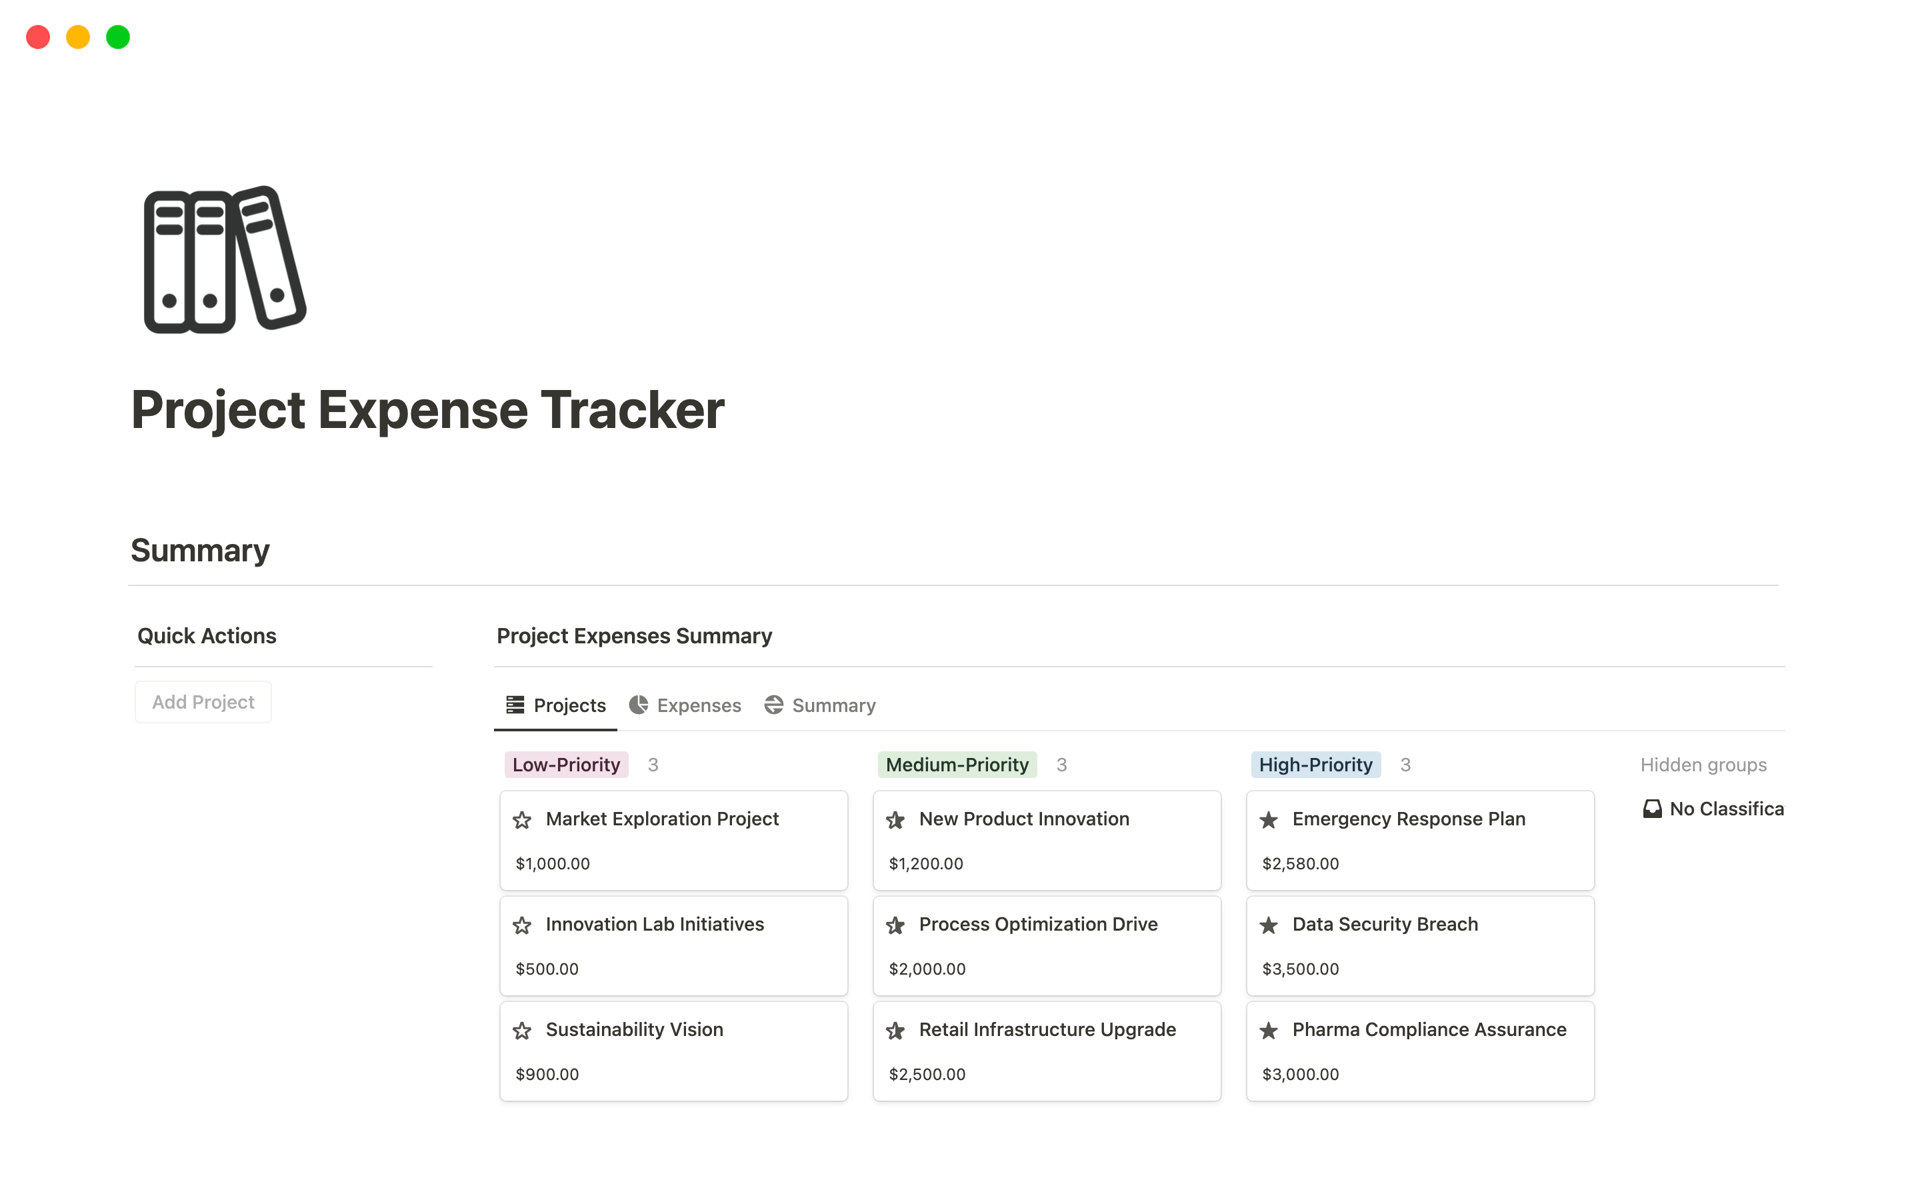 Useful for businesses and individuals managing project budgets, it tracks project-related expenses, helping ensure projects stay within budget.